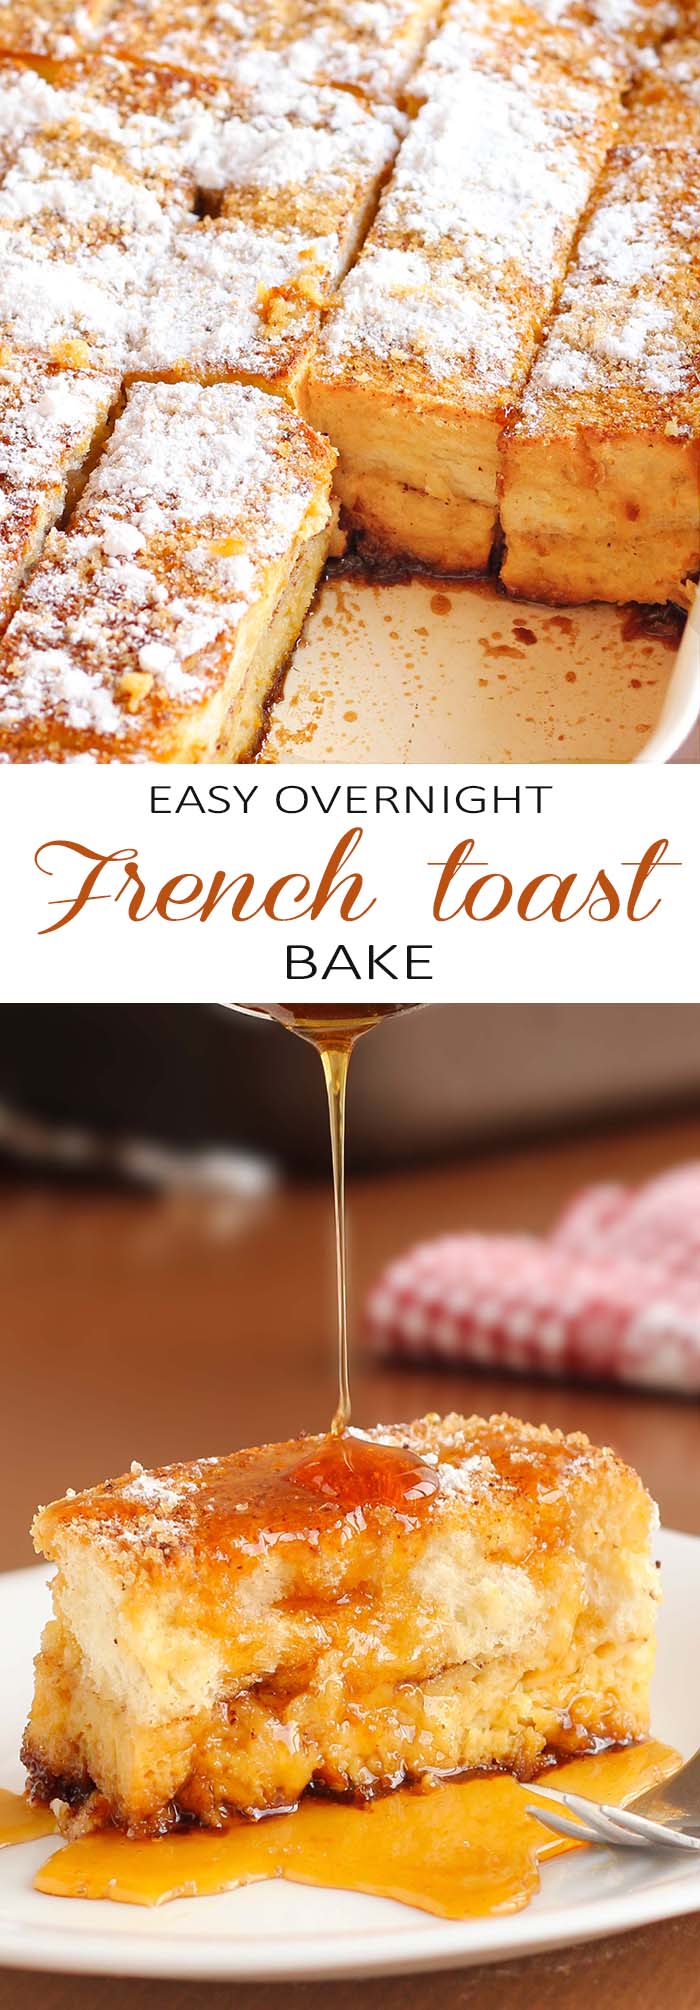 This Easy Overnight French toast bake just happens to be perfect for cold winter mornings, lazy weekend mornings, or as an easy, make-ahead Christmas morning breakfast.